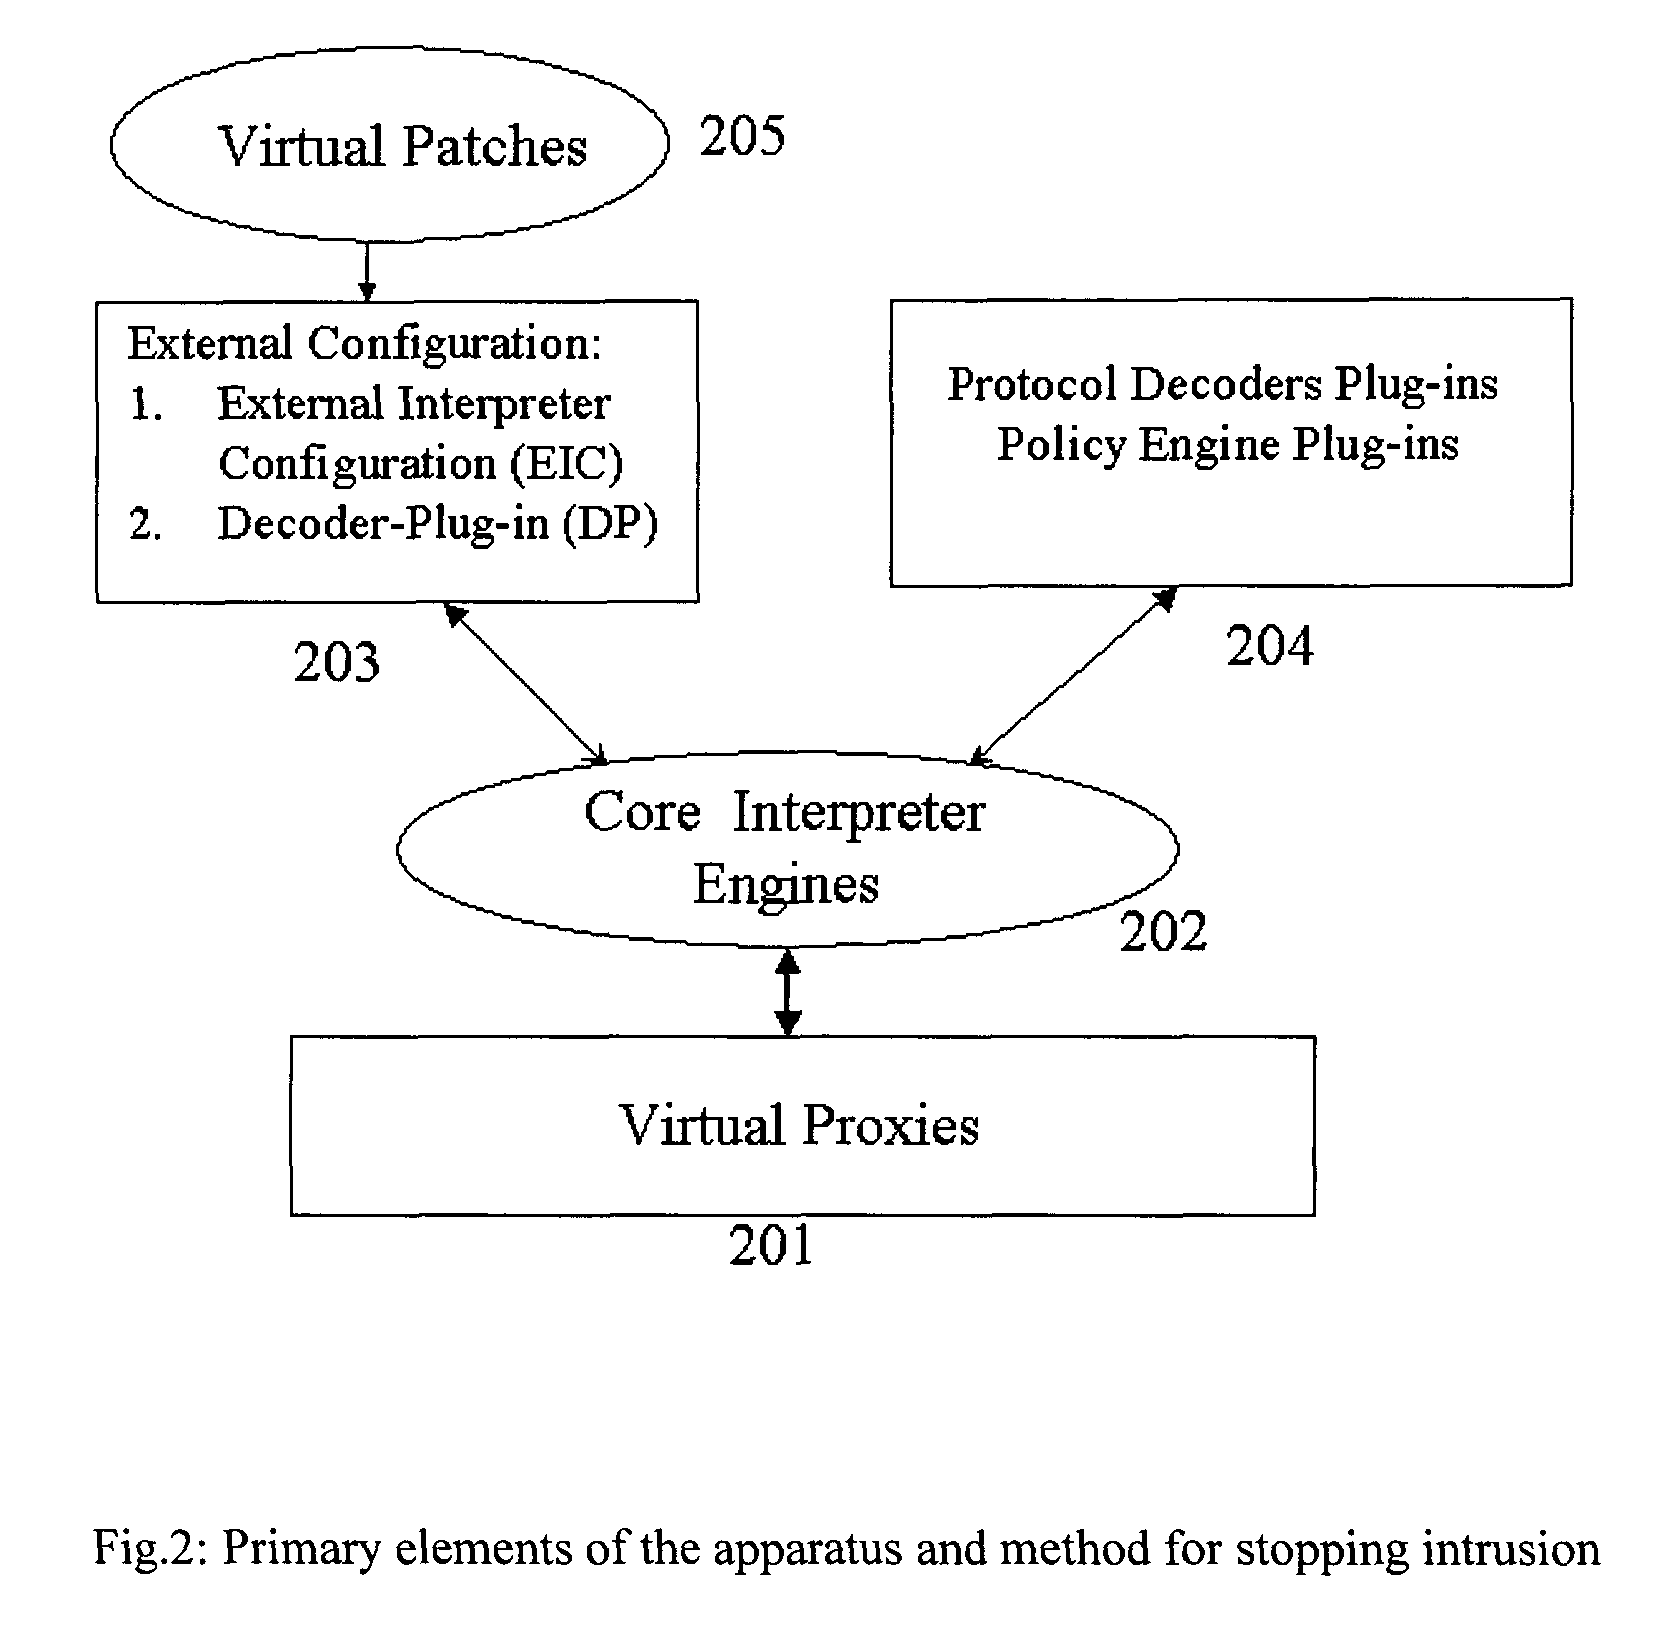 Method and apparatus for the detection and prevention of intrusions, computer worms, and denial of service attacks